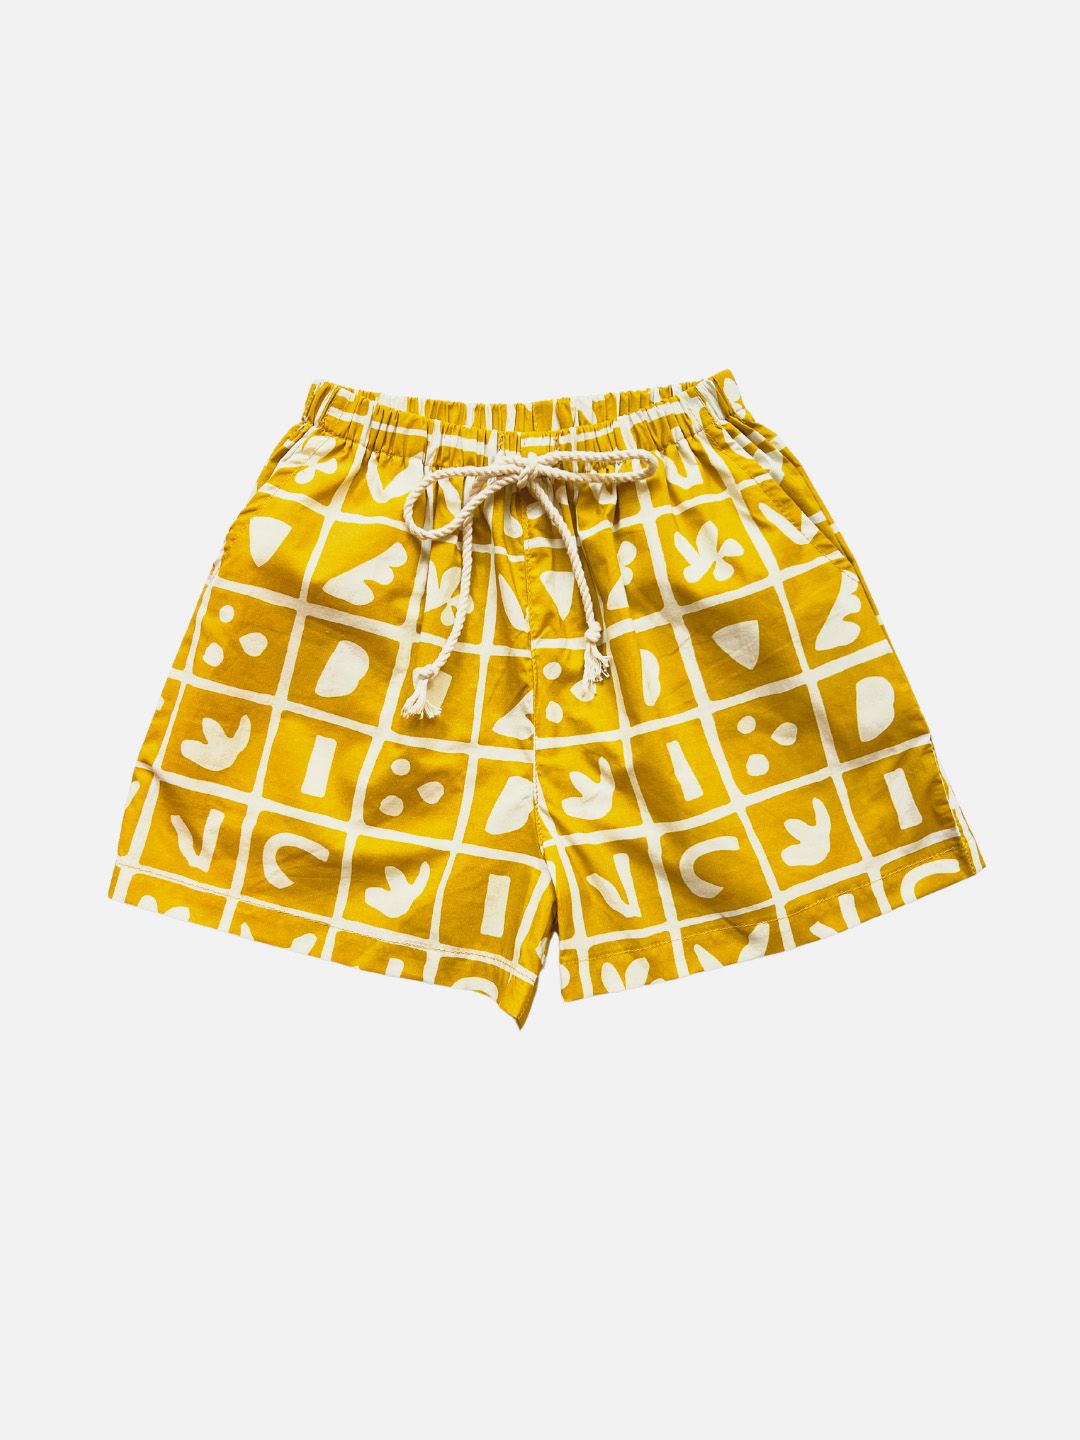 Mustard | A pair of kids' shorts in mustard yellow overlaid with a grid of different shapes in white